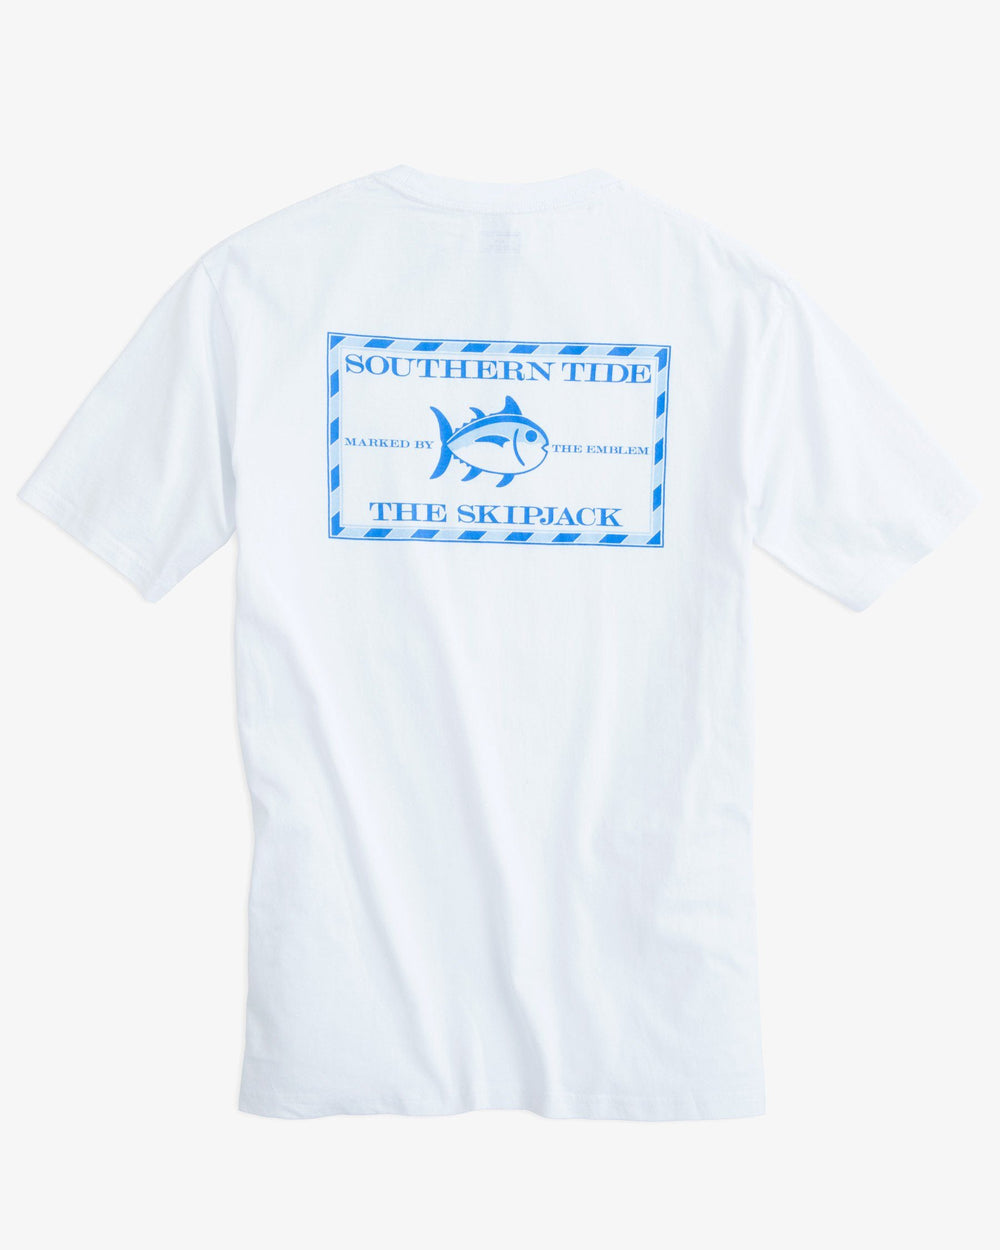 The back view of the Men's White Original Skipjack Short Sleeve T-Shirt by Southern Tide - White